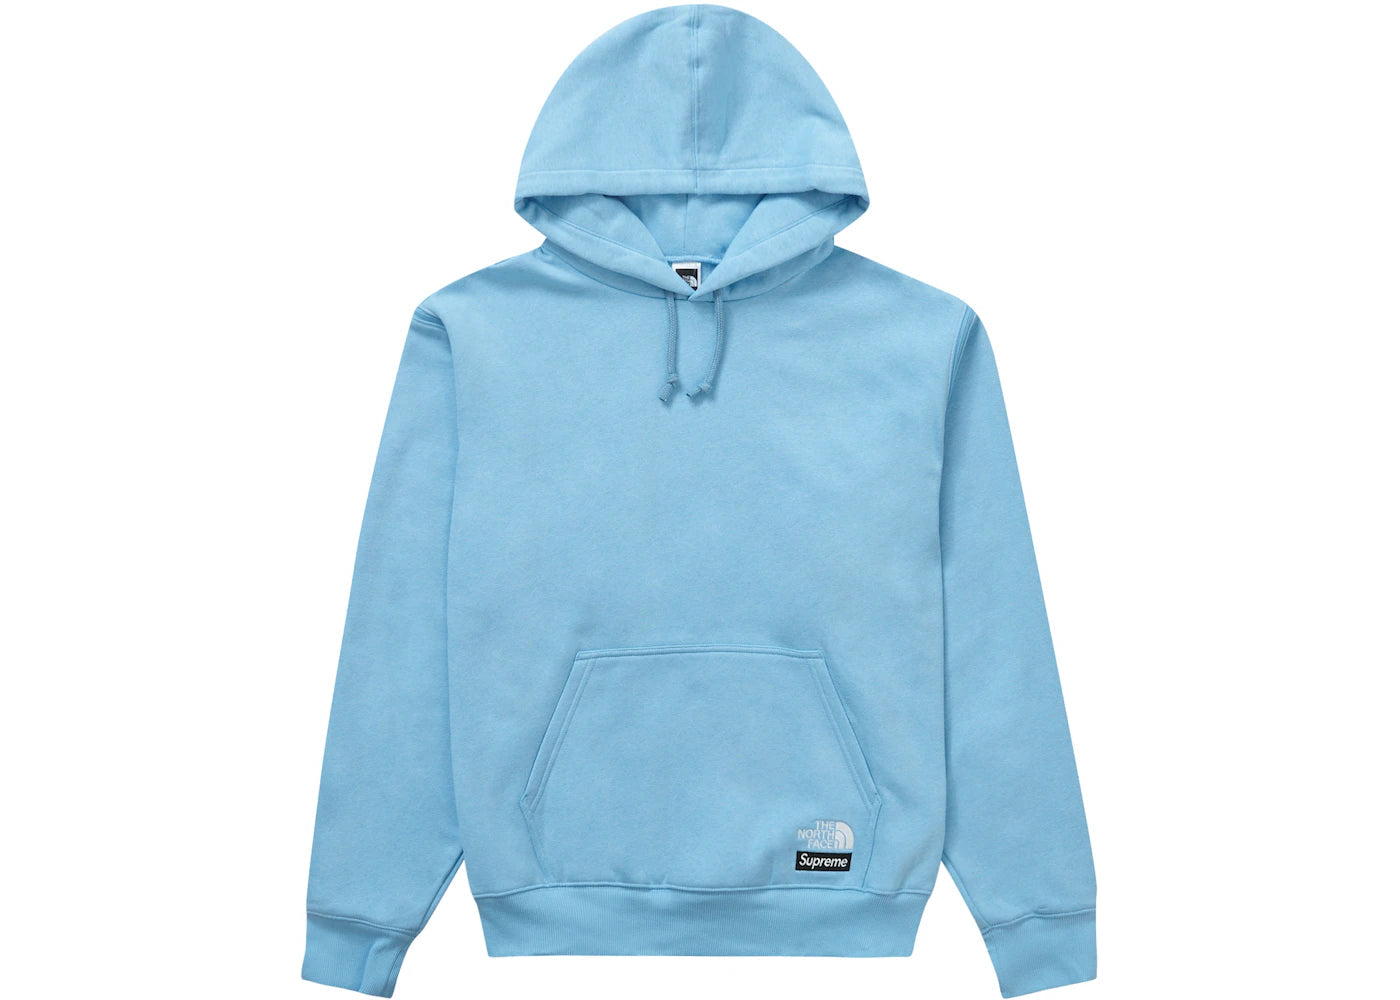 Supreme The North Face Convertible Hooded Sweatshirt - Blue Next Step